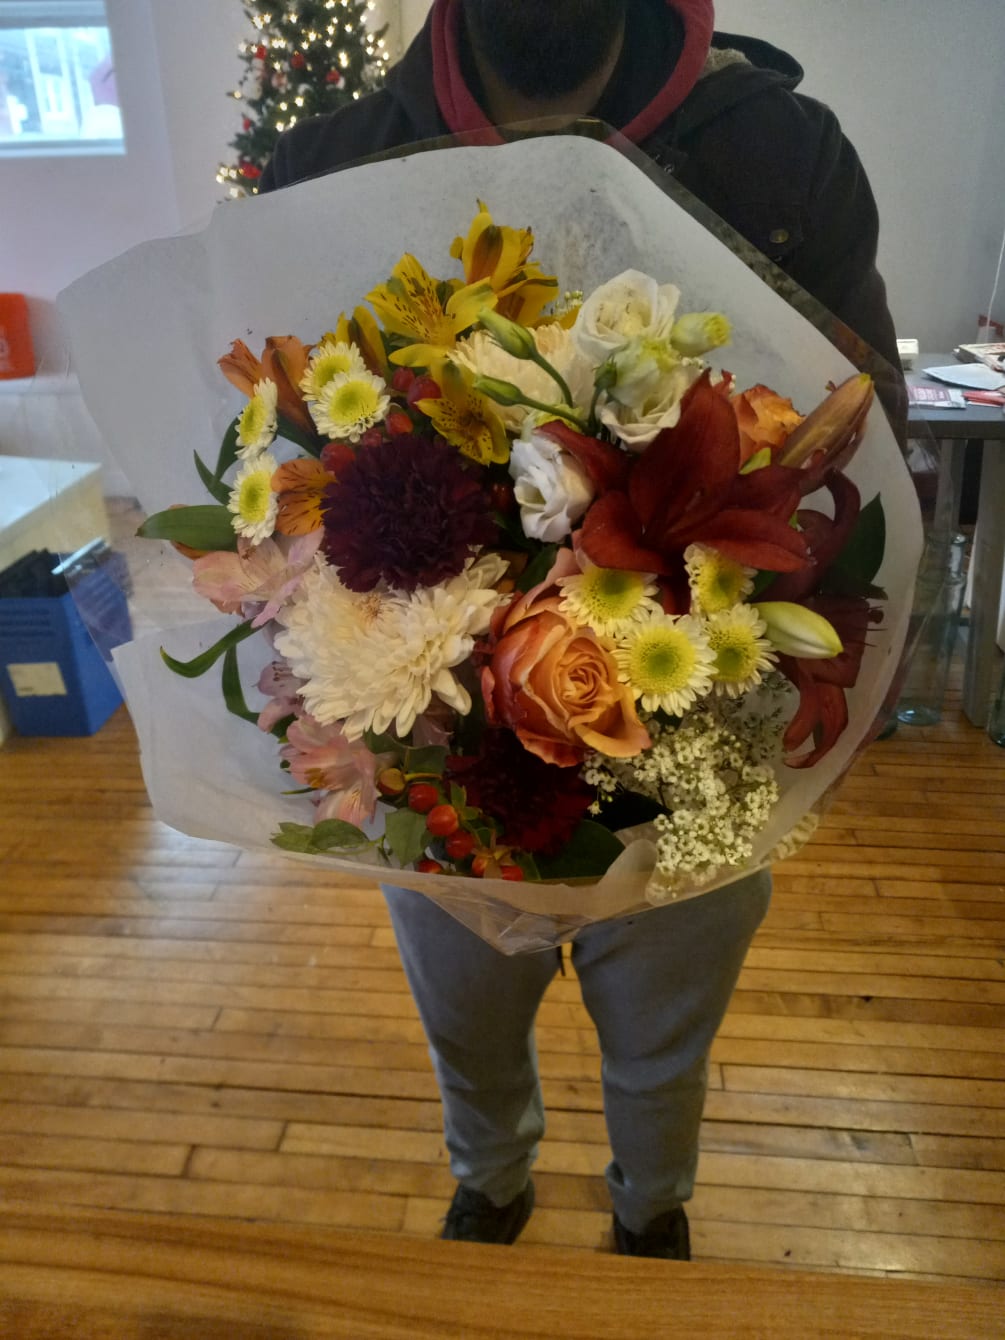 Beautiful fresh mix of varied flowers wrapped up as a simple bouquet